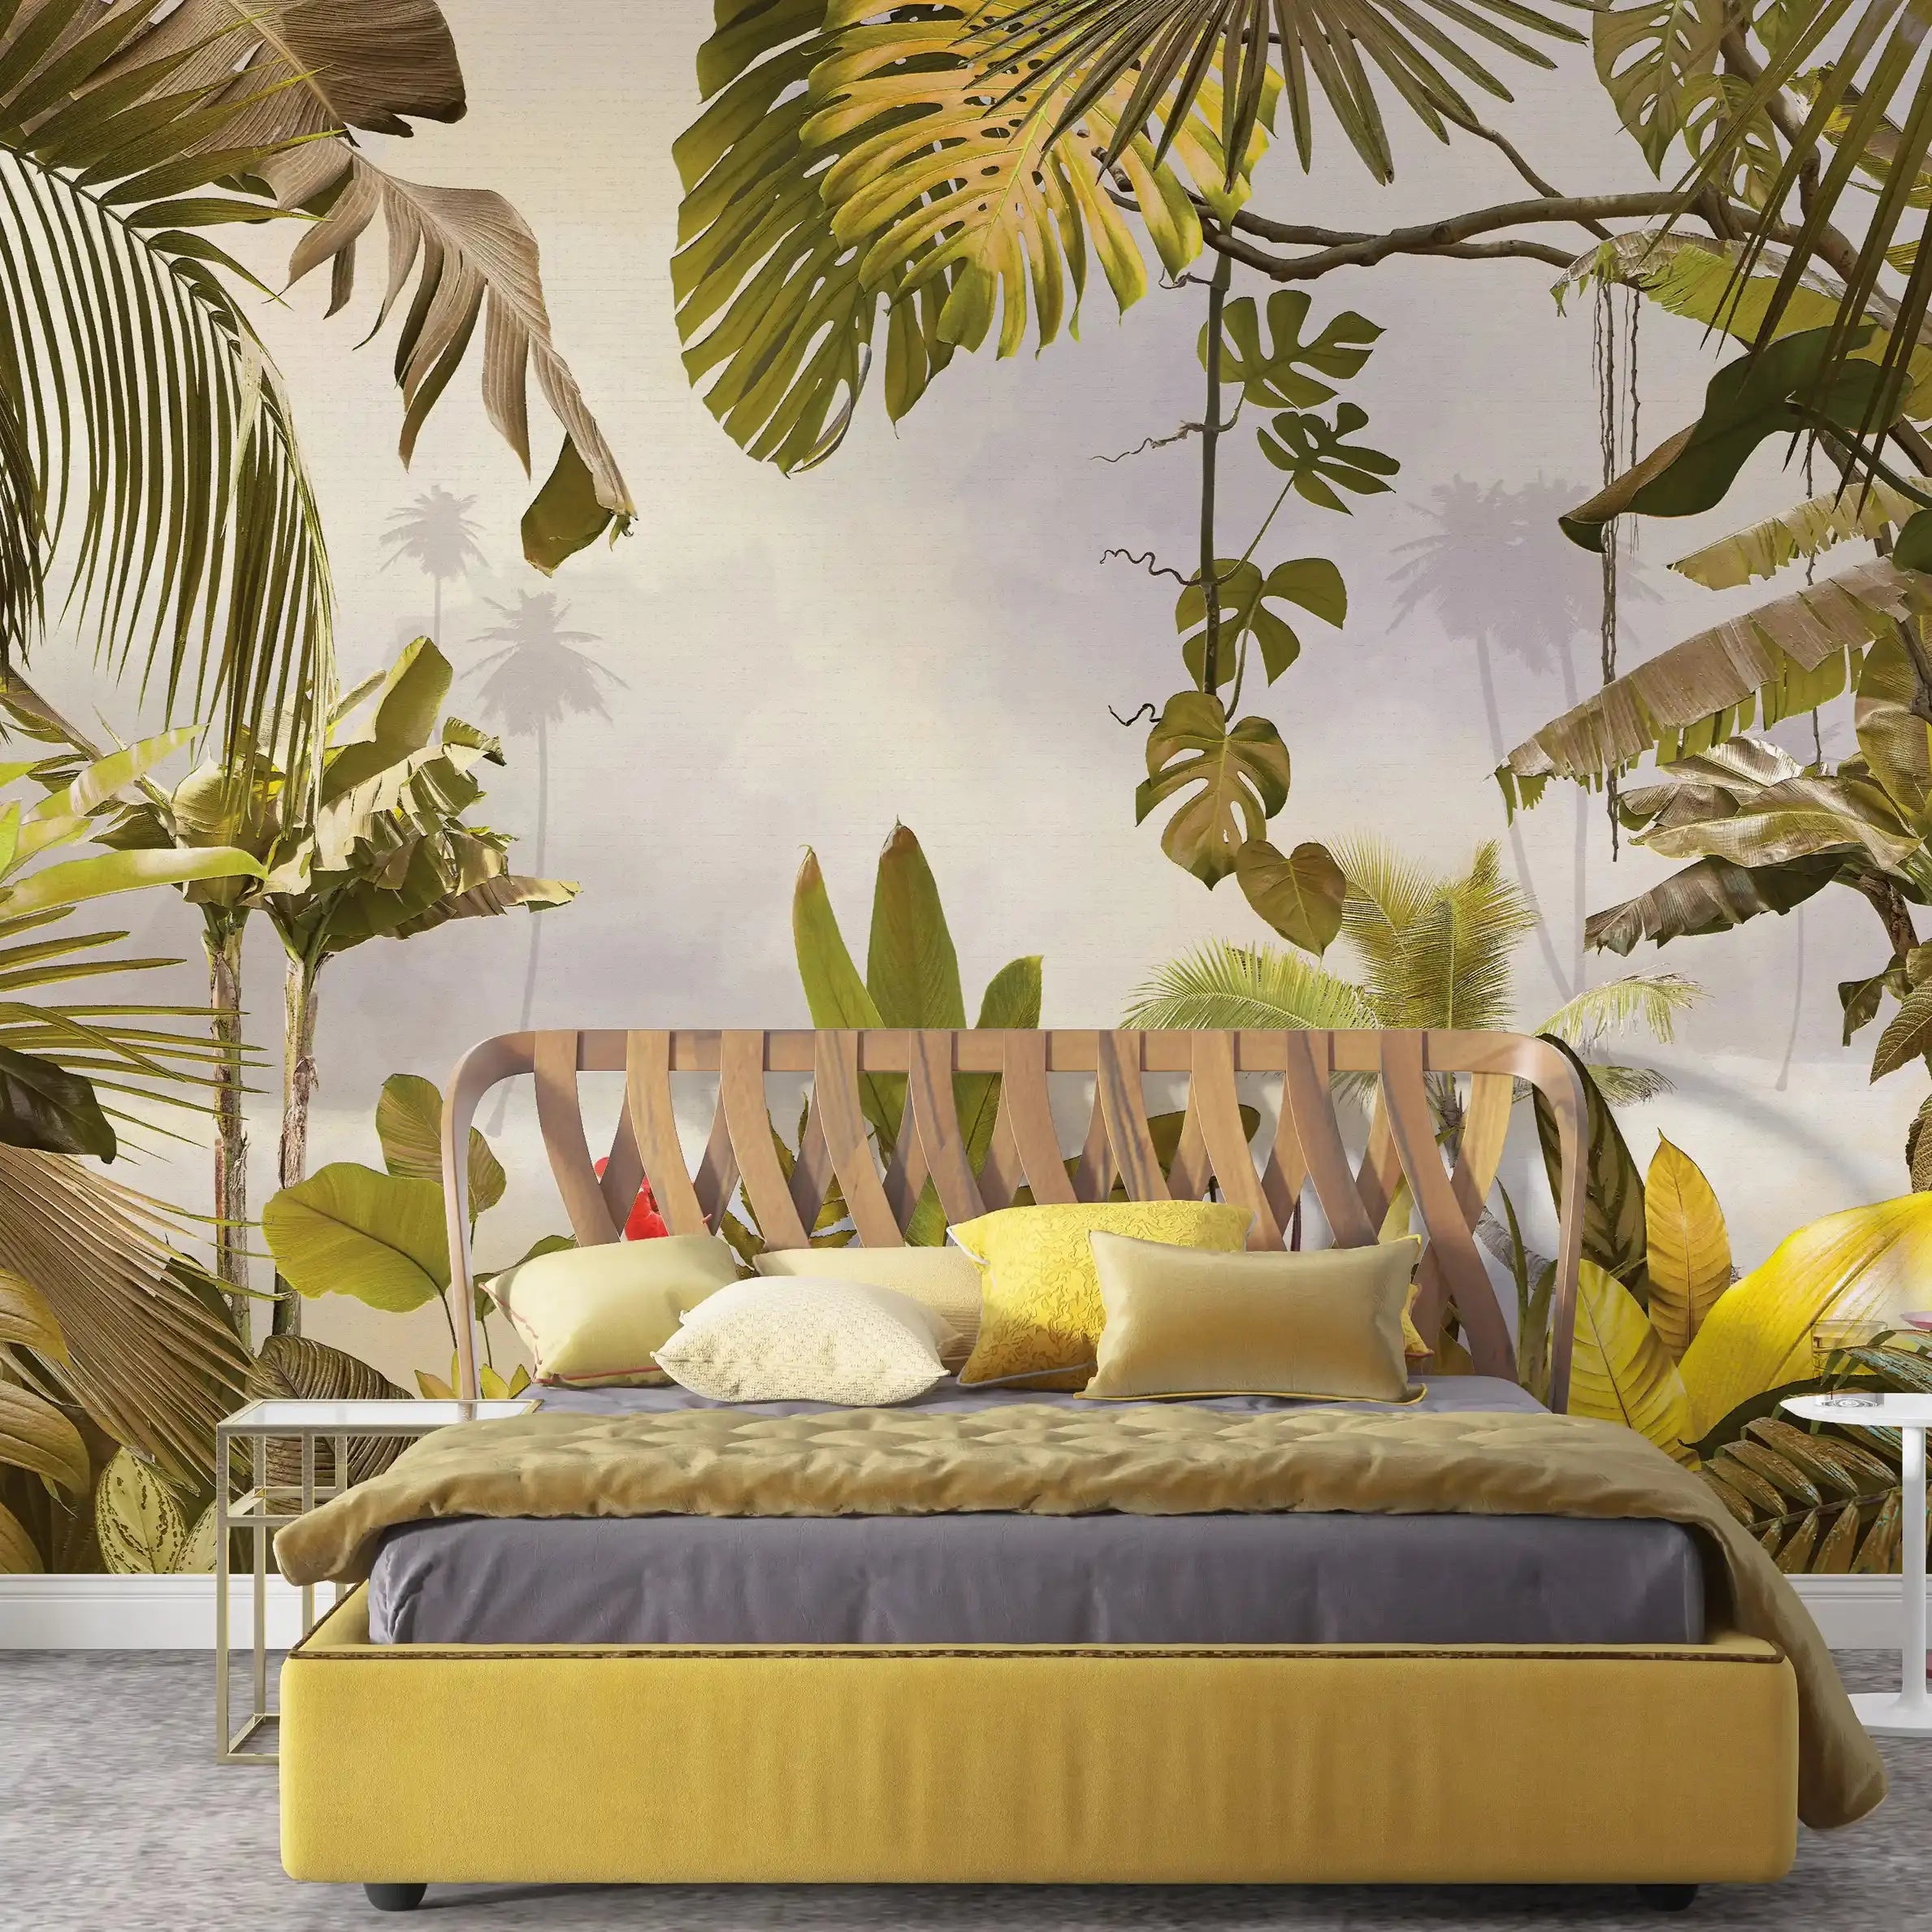 3014-B / Removable Wallpaper Peel and Stick - Abstract Colorful Tropical Plants Design for Modern Home Decor - Artevella